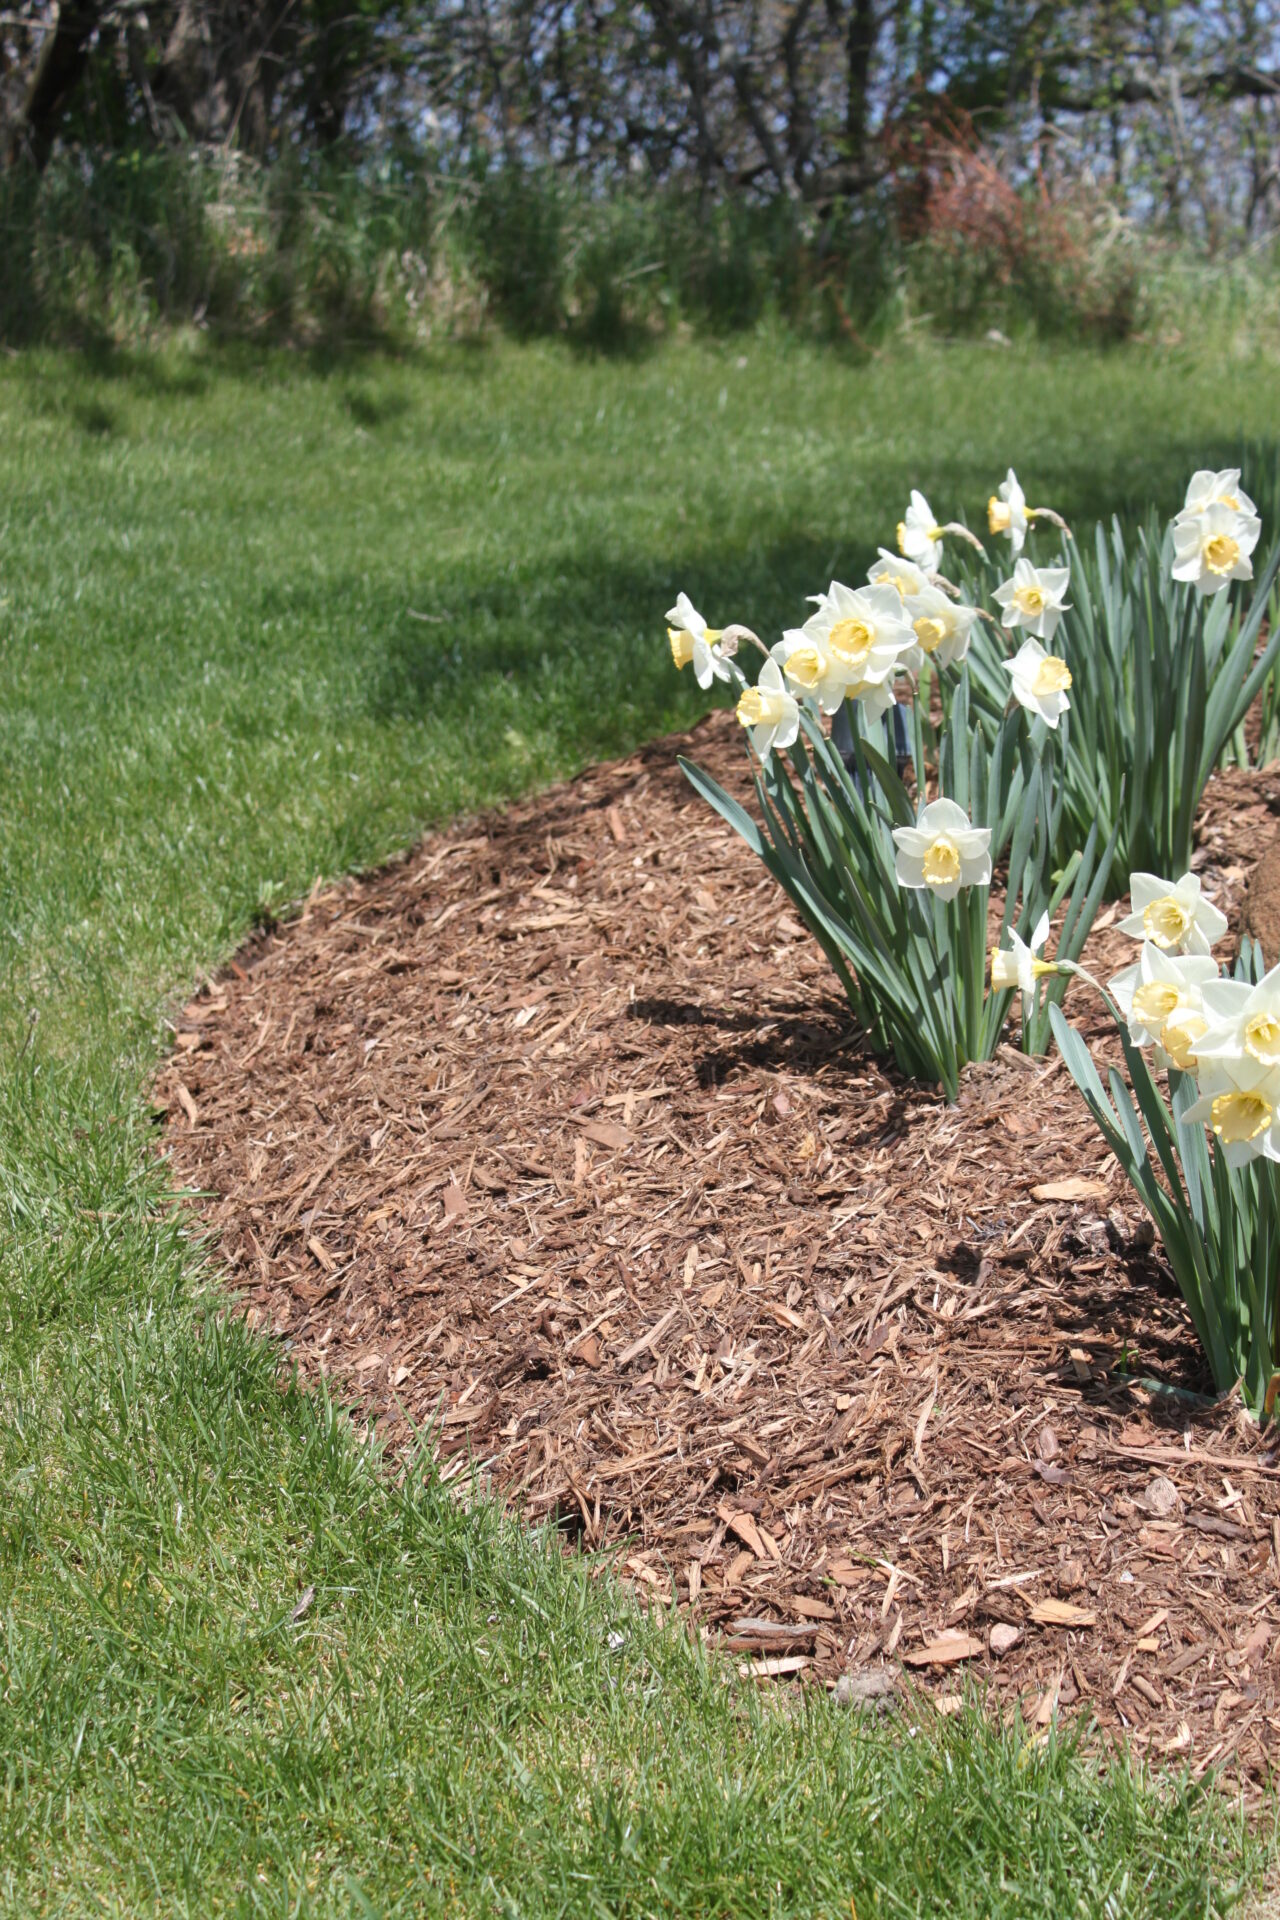 A garden bed covered with mulch edged by manicured grass, showcasing a group of blooming daffodils under a sunny sky with trees in the background.